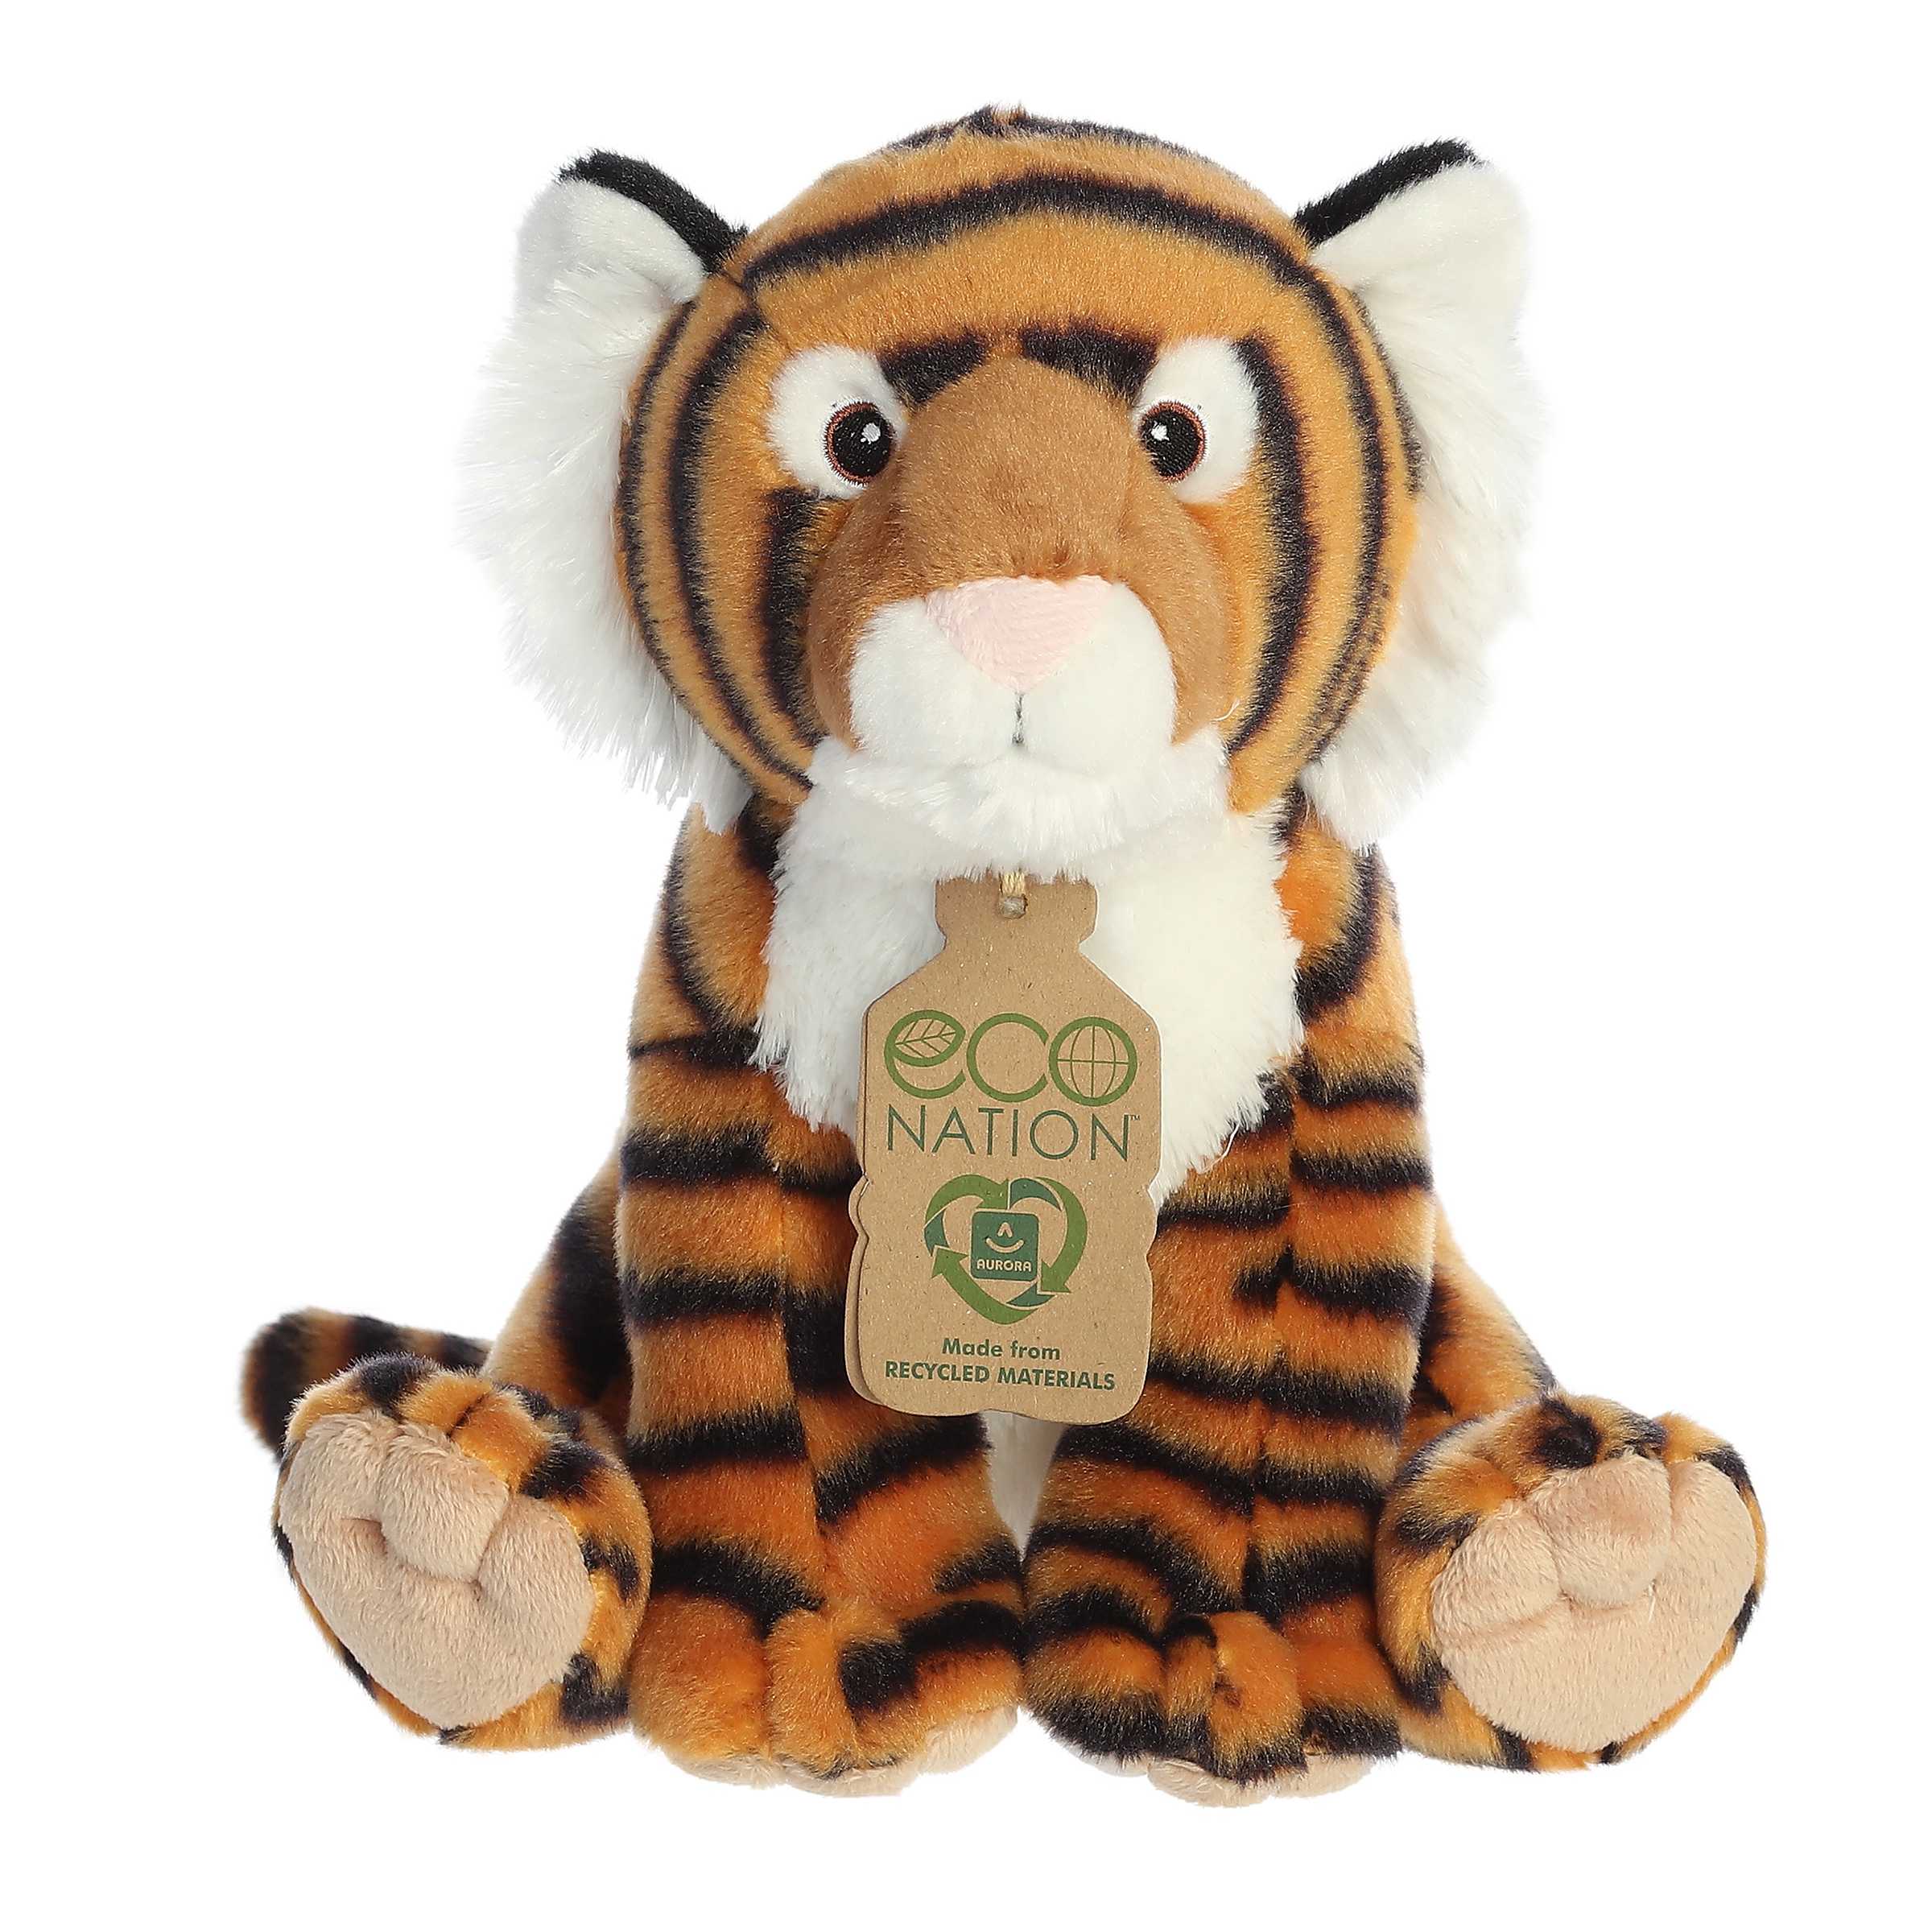 Eco Hugs Bengal Tiger Plush by Aurora, featuring vibrant stripes, with a hang tag symbolizing eco-stewardship.